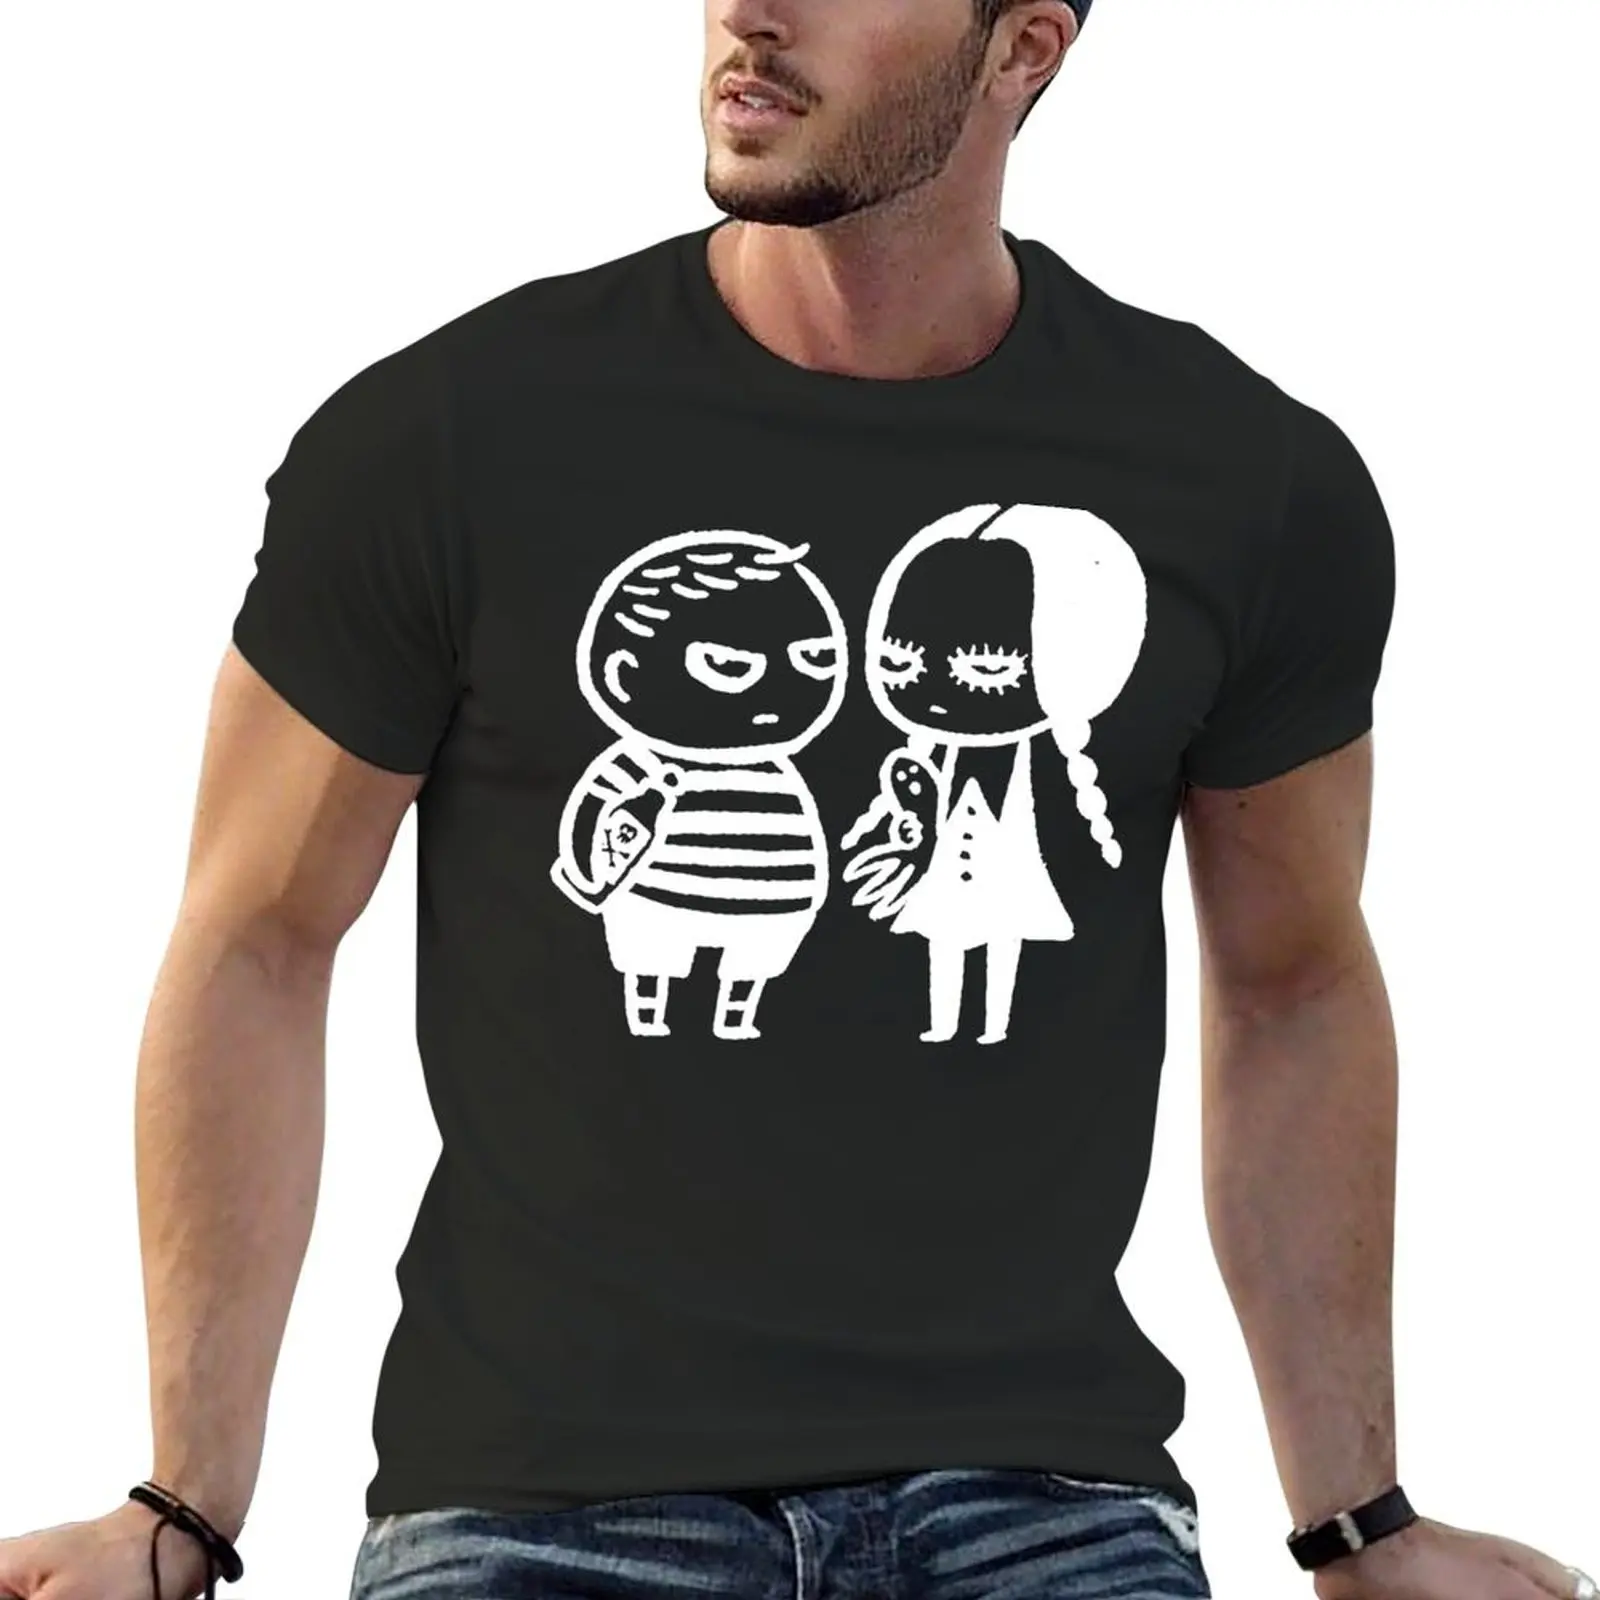 

This is just how I look T-shirt summer tops cute clothes funnys slim fit t shirts for men